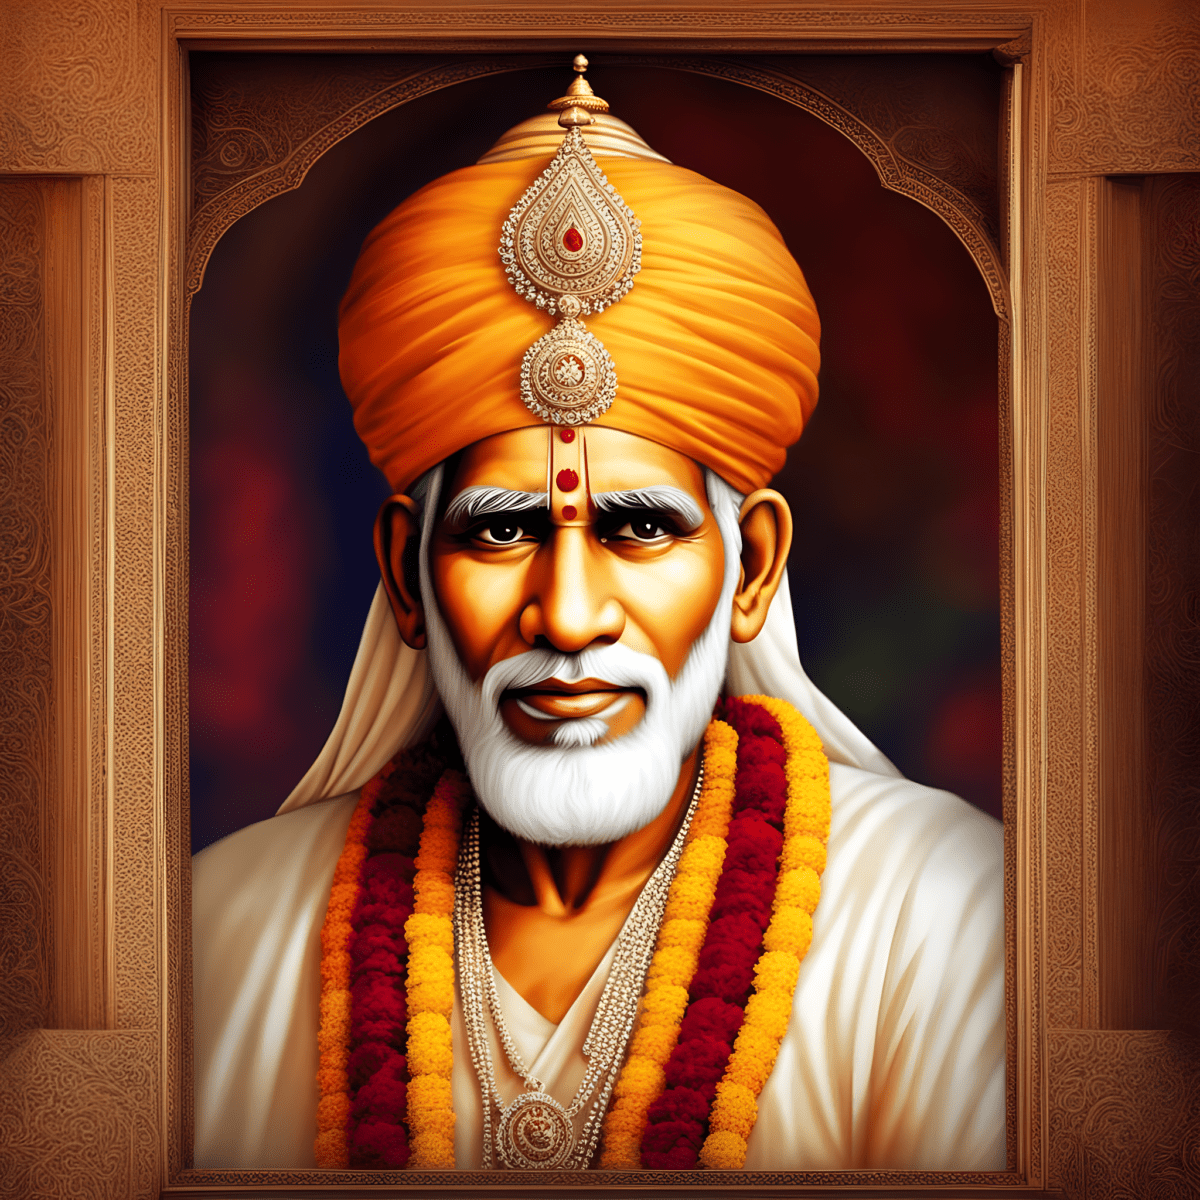 i-want-to-create-a-single-image-of-shirdi-and-in-this-image-i-want-to-put-sai-baba-photos-in-this-image-but-not-shows-sai-easily-in-that-photo-need-some-effort-to-find-sai-baba-image-in-that-frame (2)